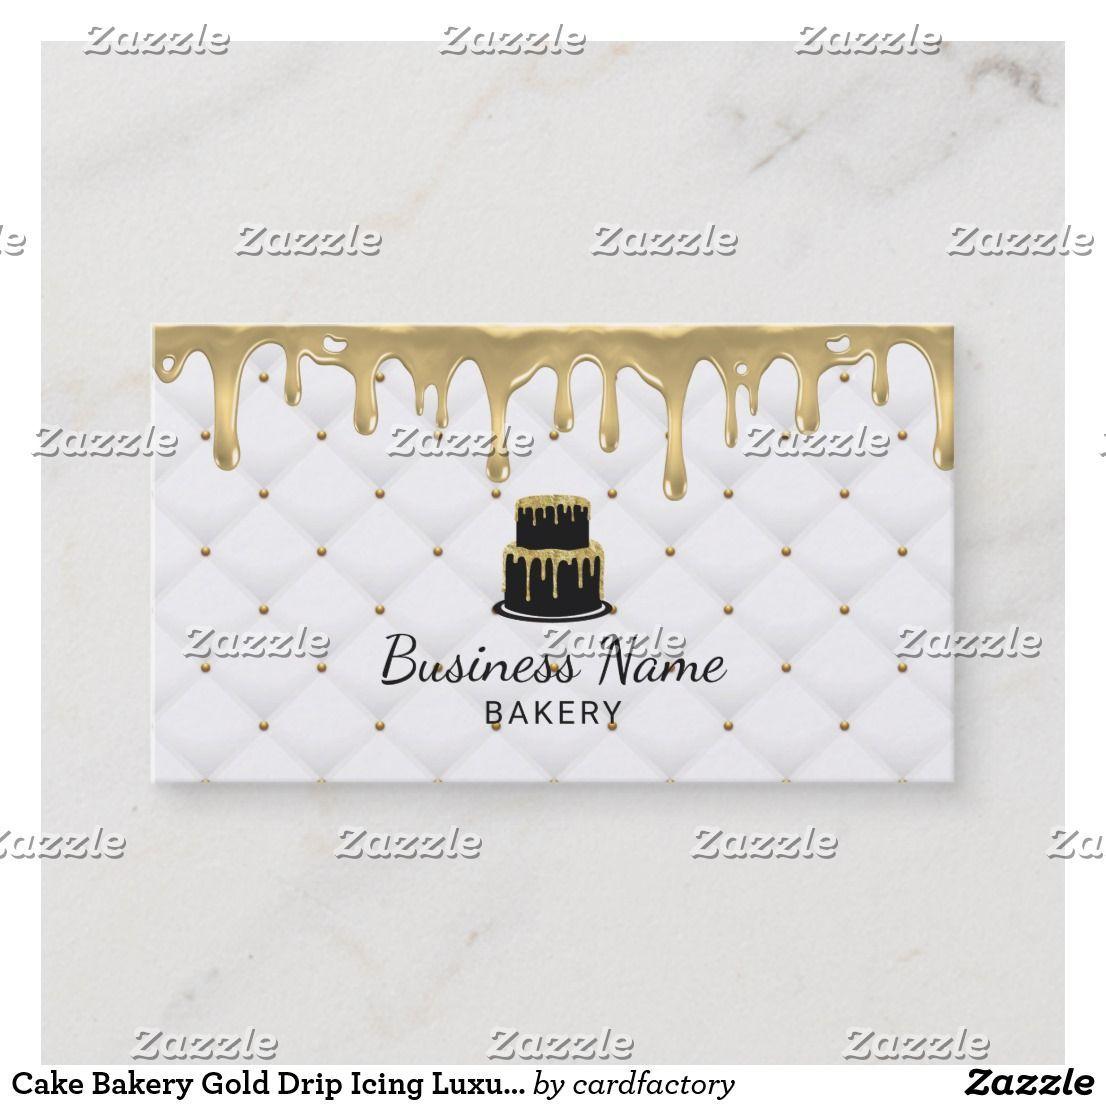 Drip Gold and White Logo - Cake Bakery Gold Drip Icing Luxury White Business Card | Freelance ...